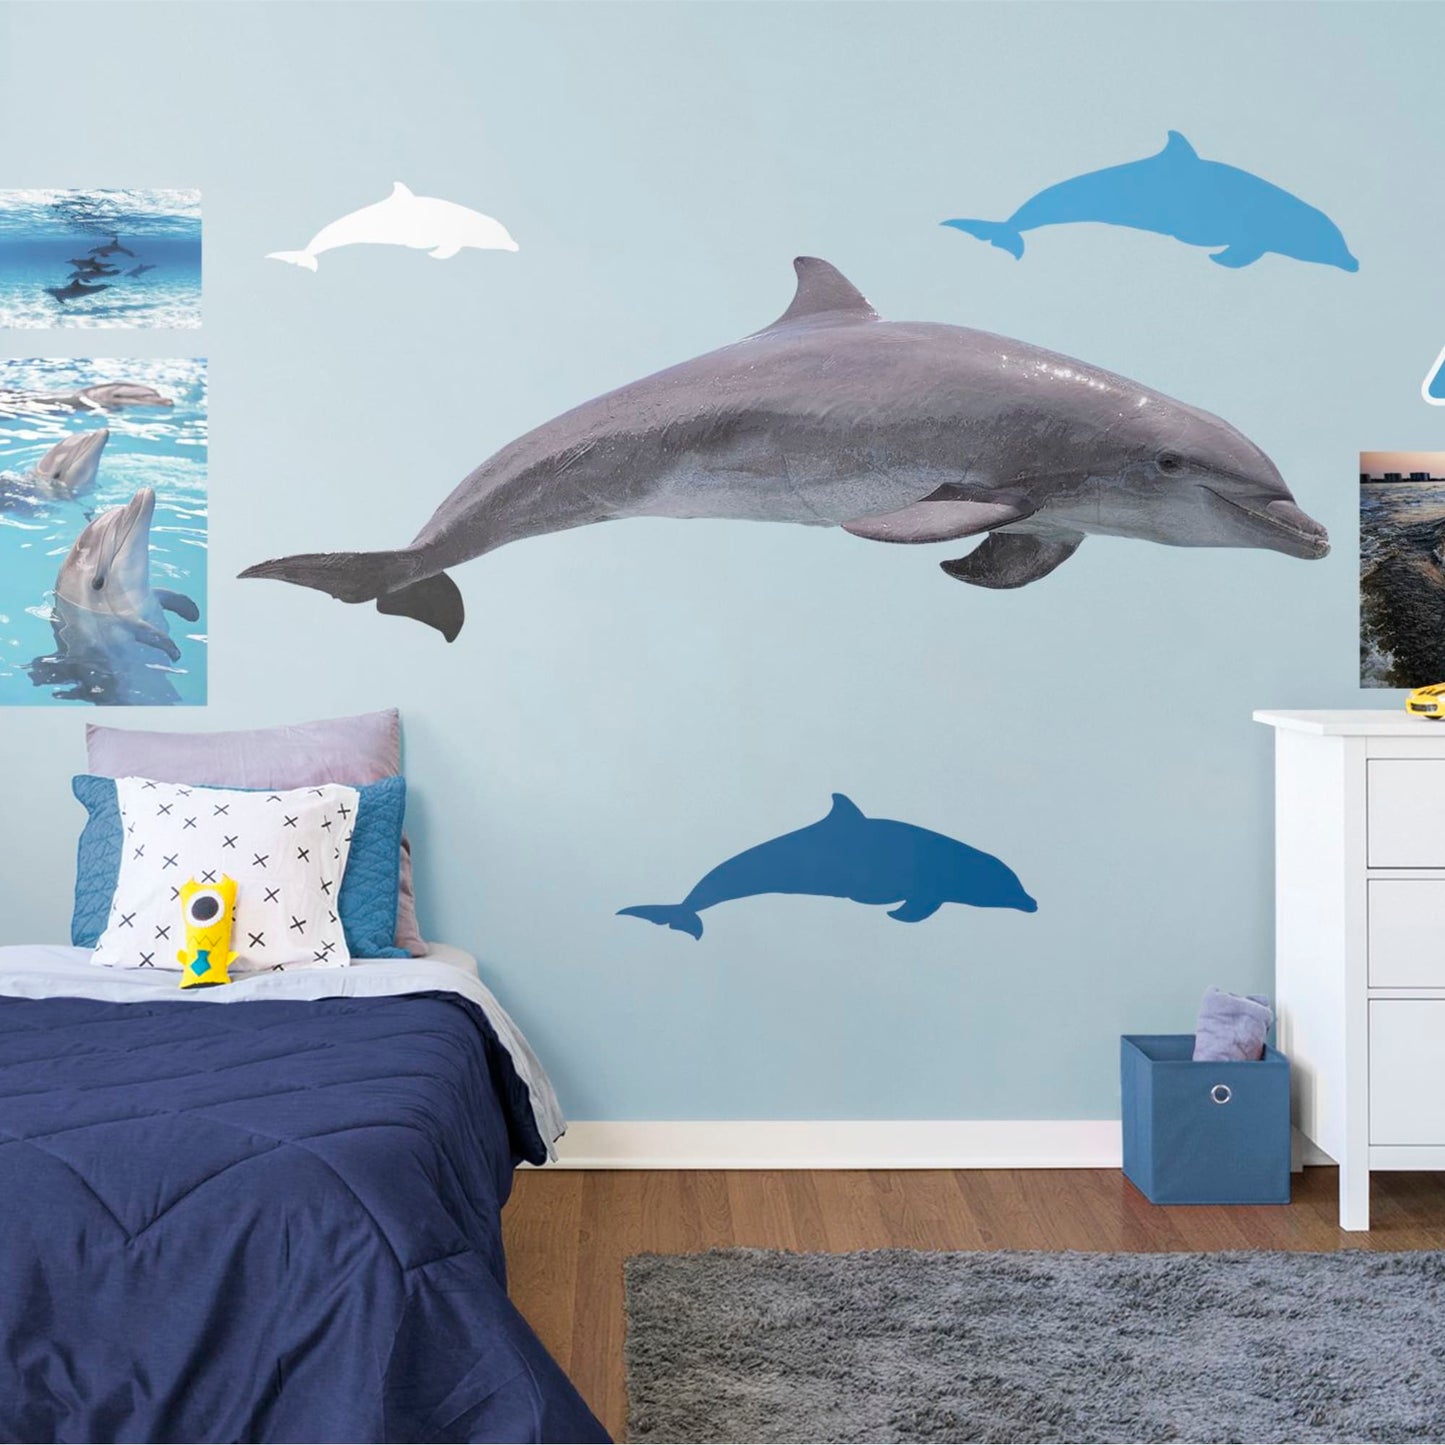 Giant Animal + 2 Decals (62"W x 22"H)